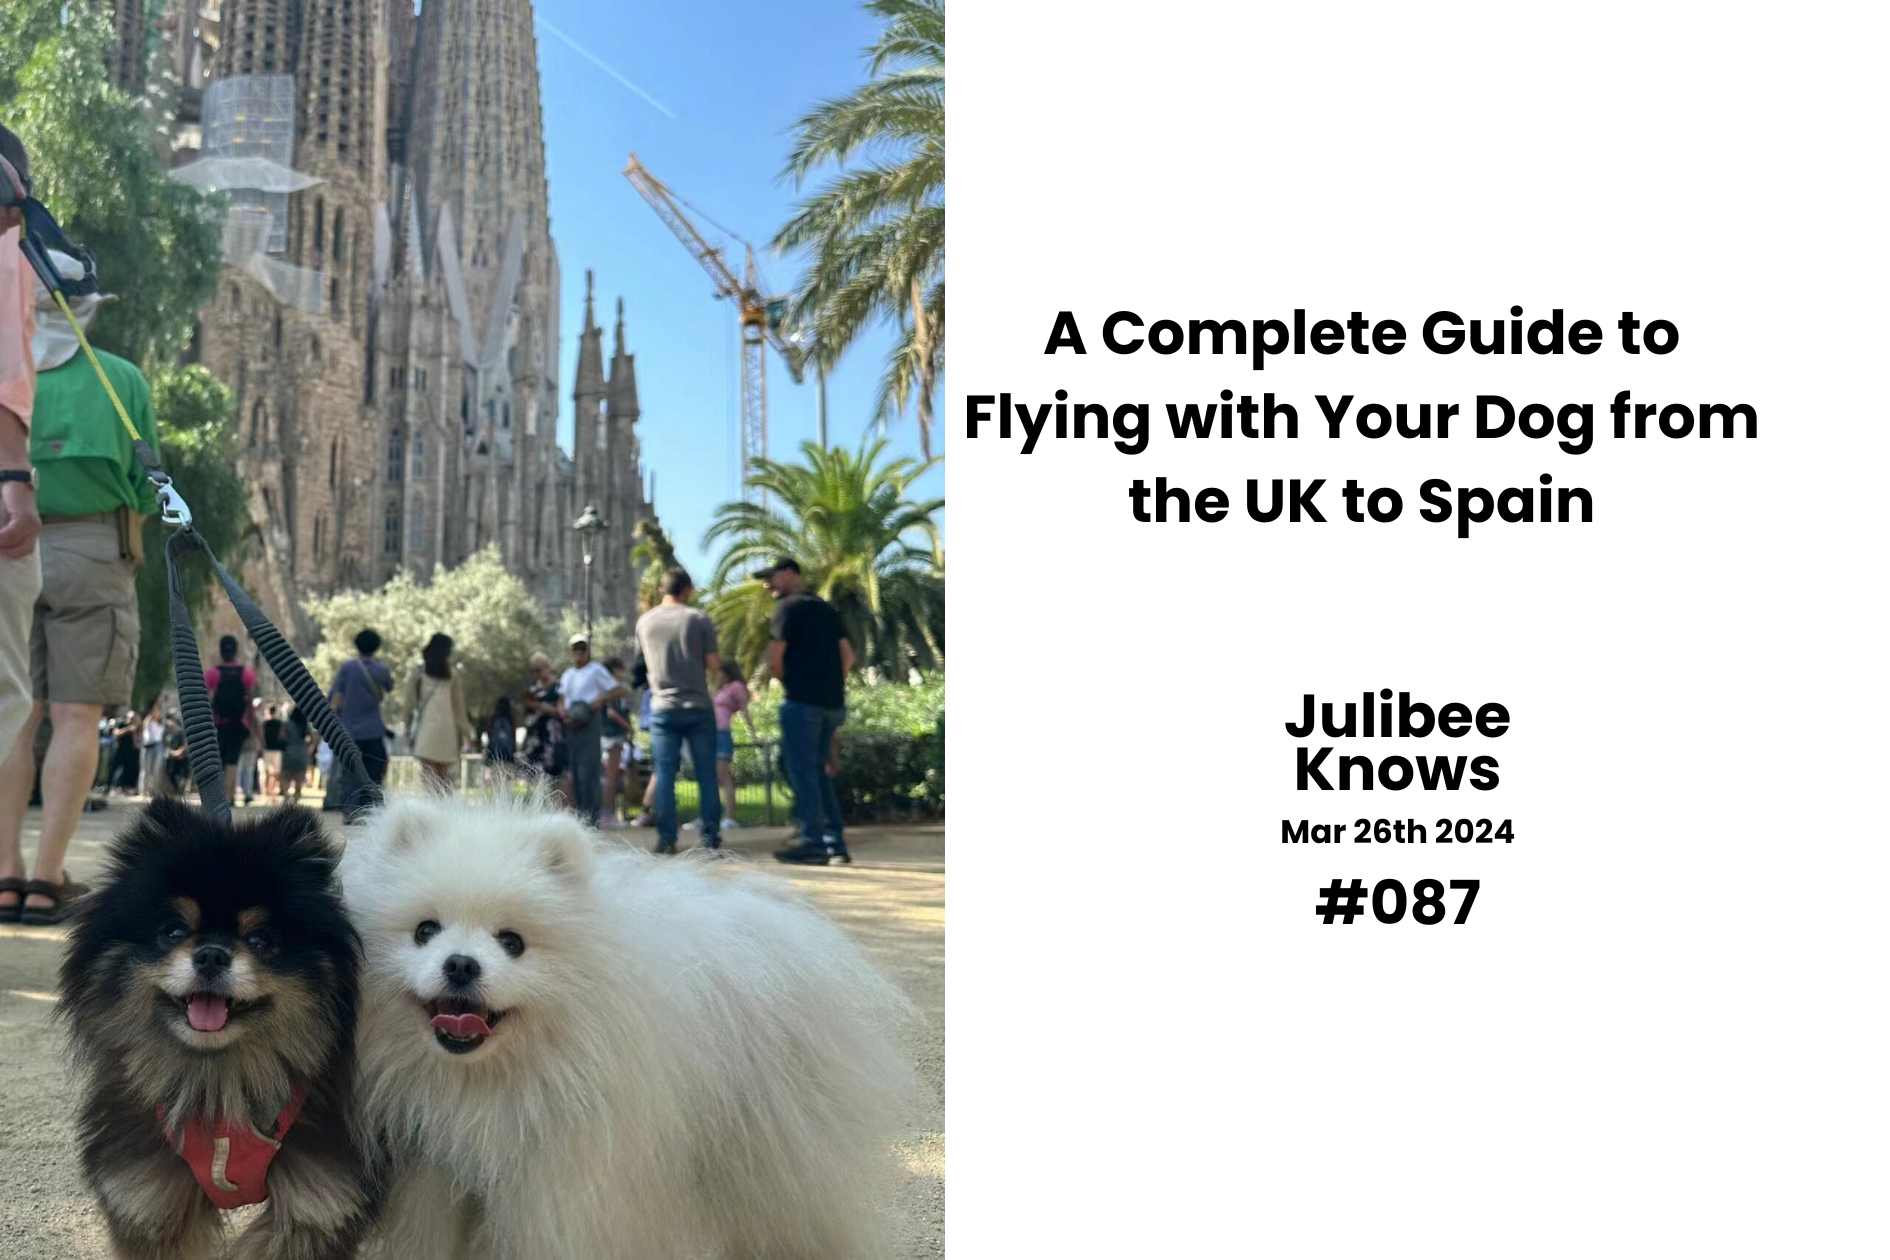 A Complete Guide to Flying with Your Dog from the UK to Spain